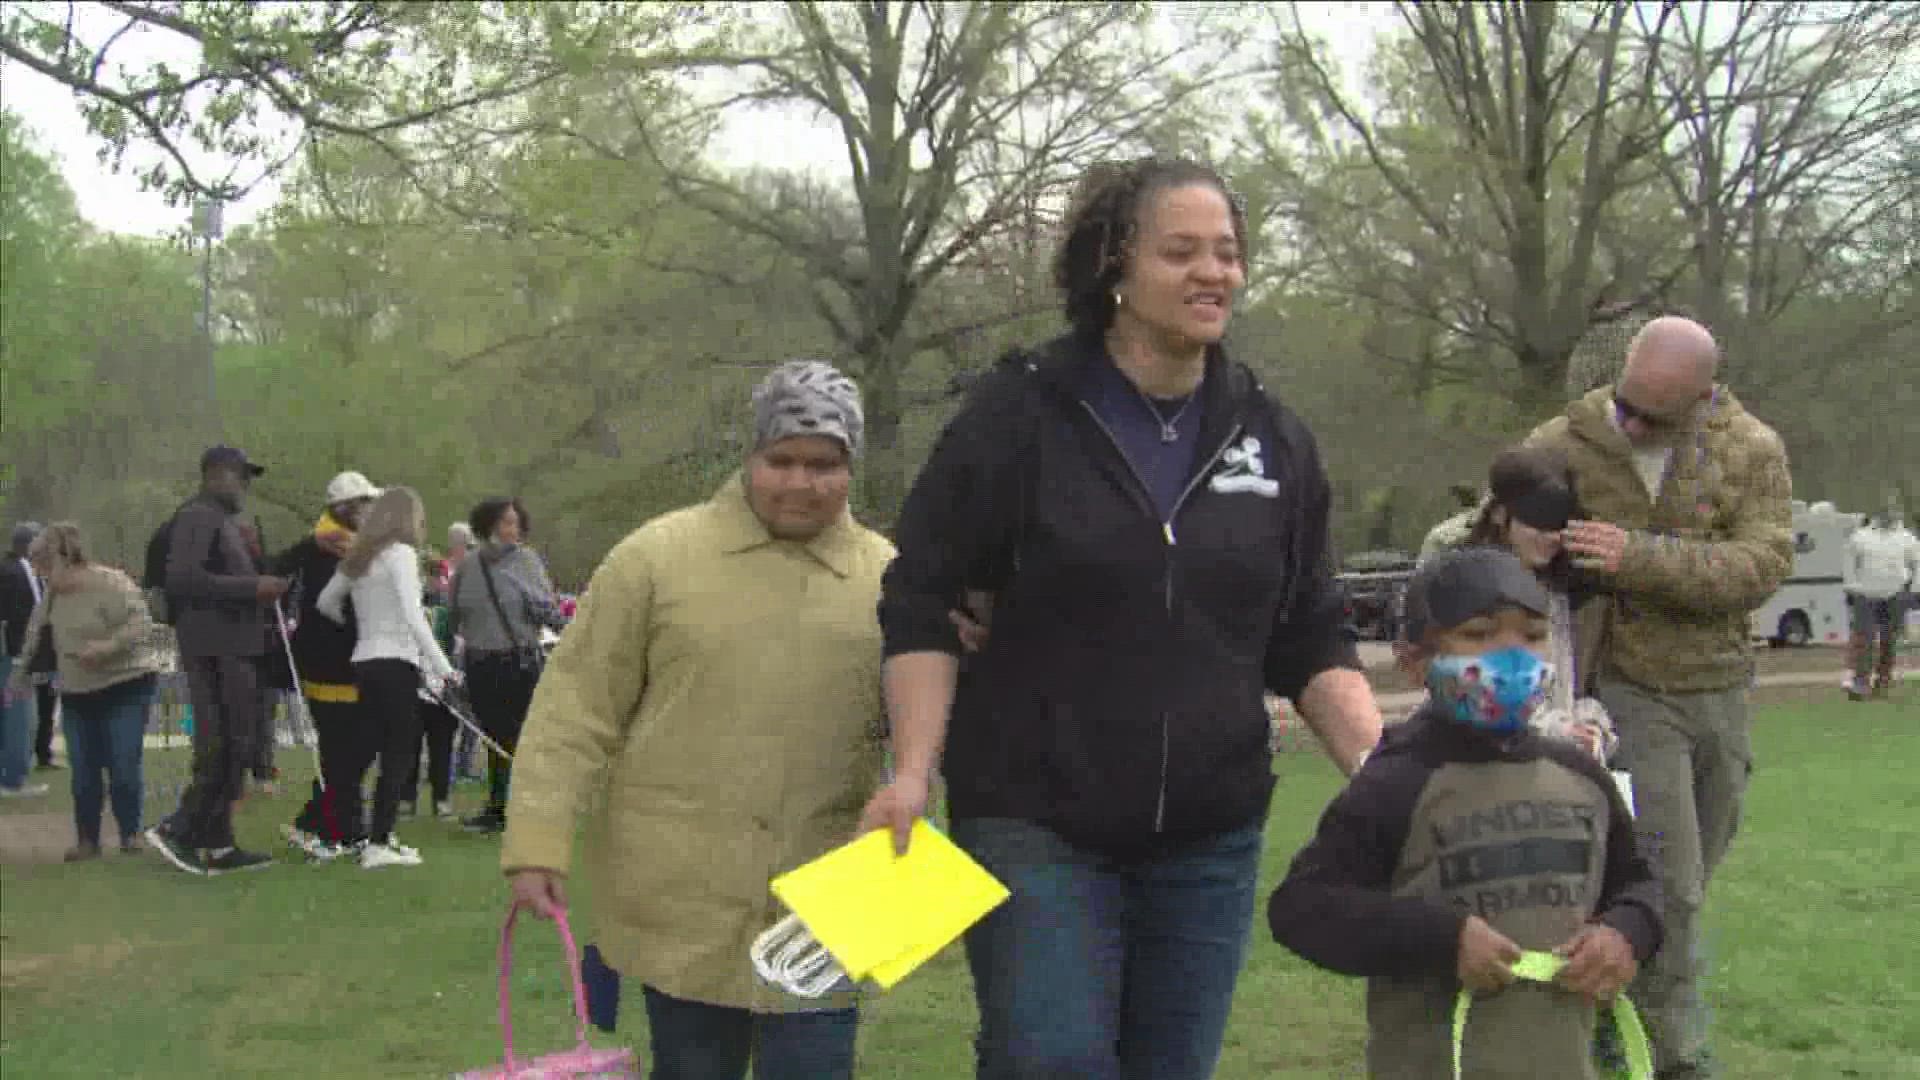 The Memphis Beeping Egg Hunt Explosion was put on by the county bomb squad and Clovernook Center for the Blind and Visually Impaired at Overton Park.